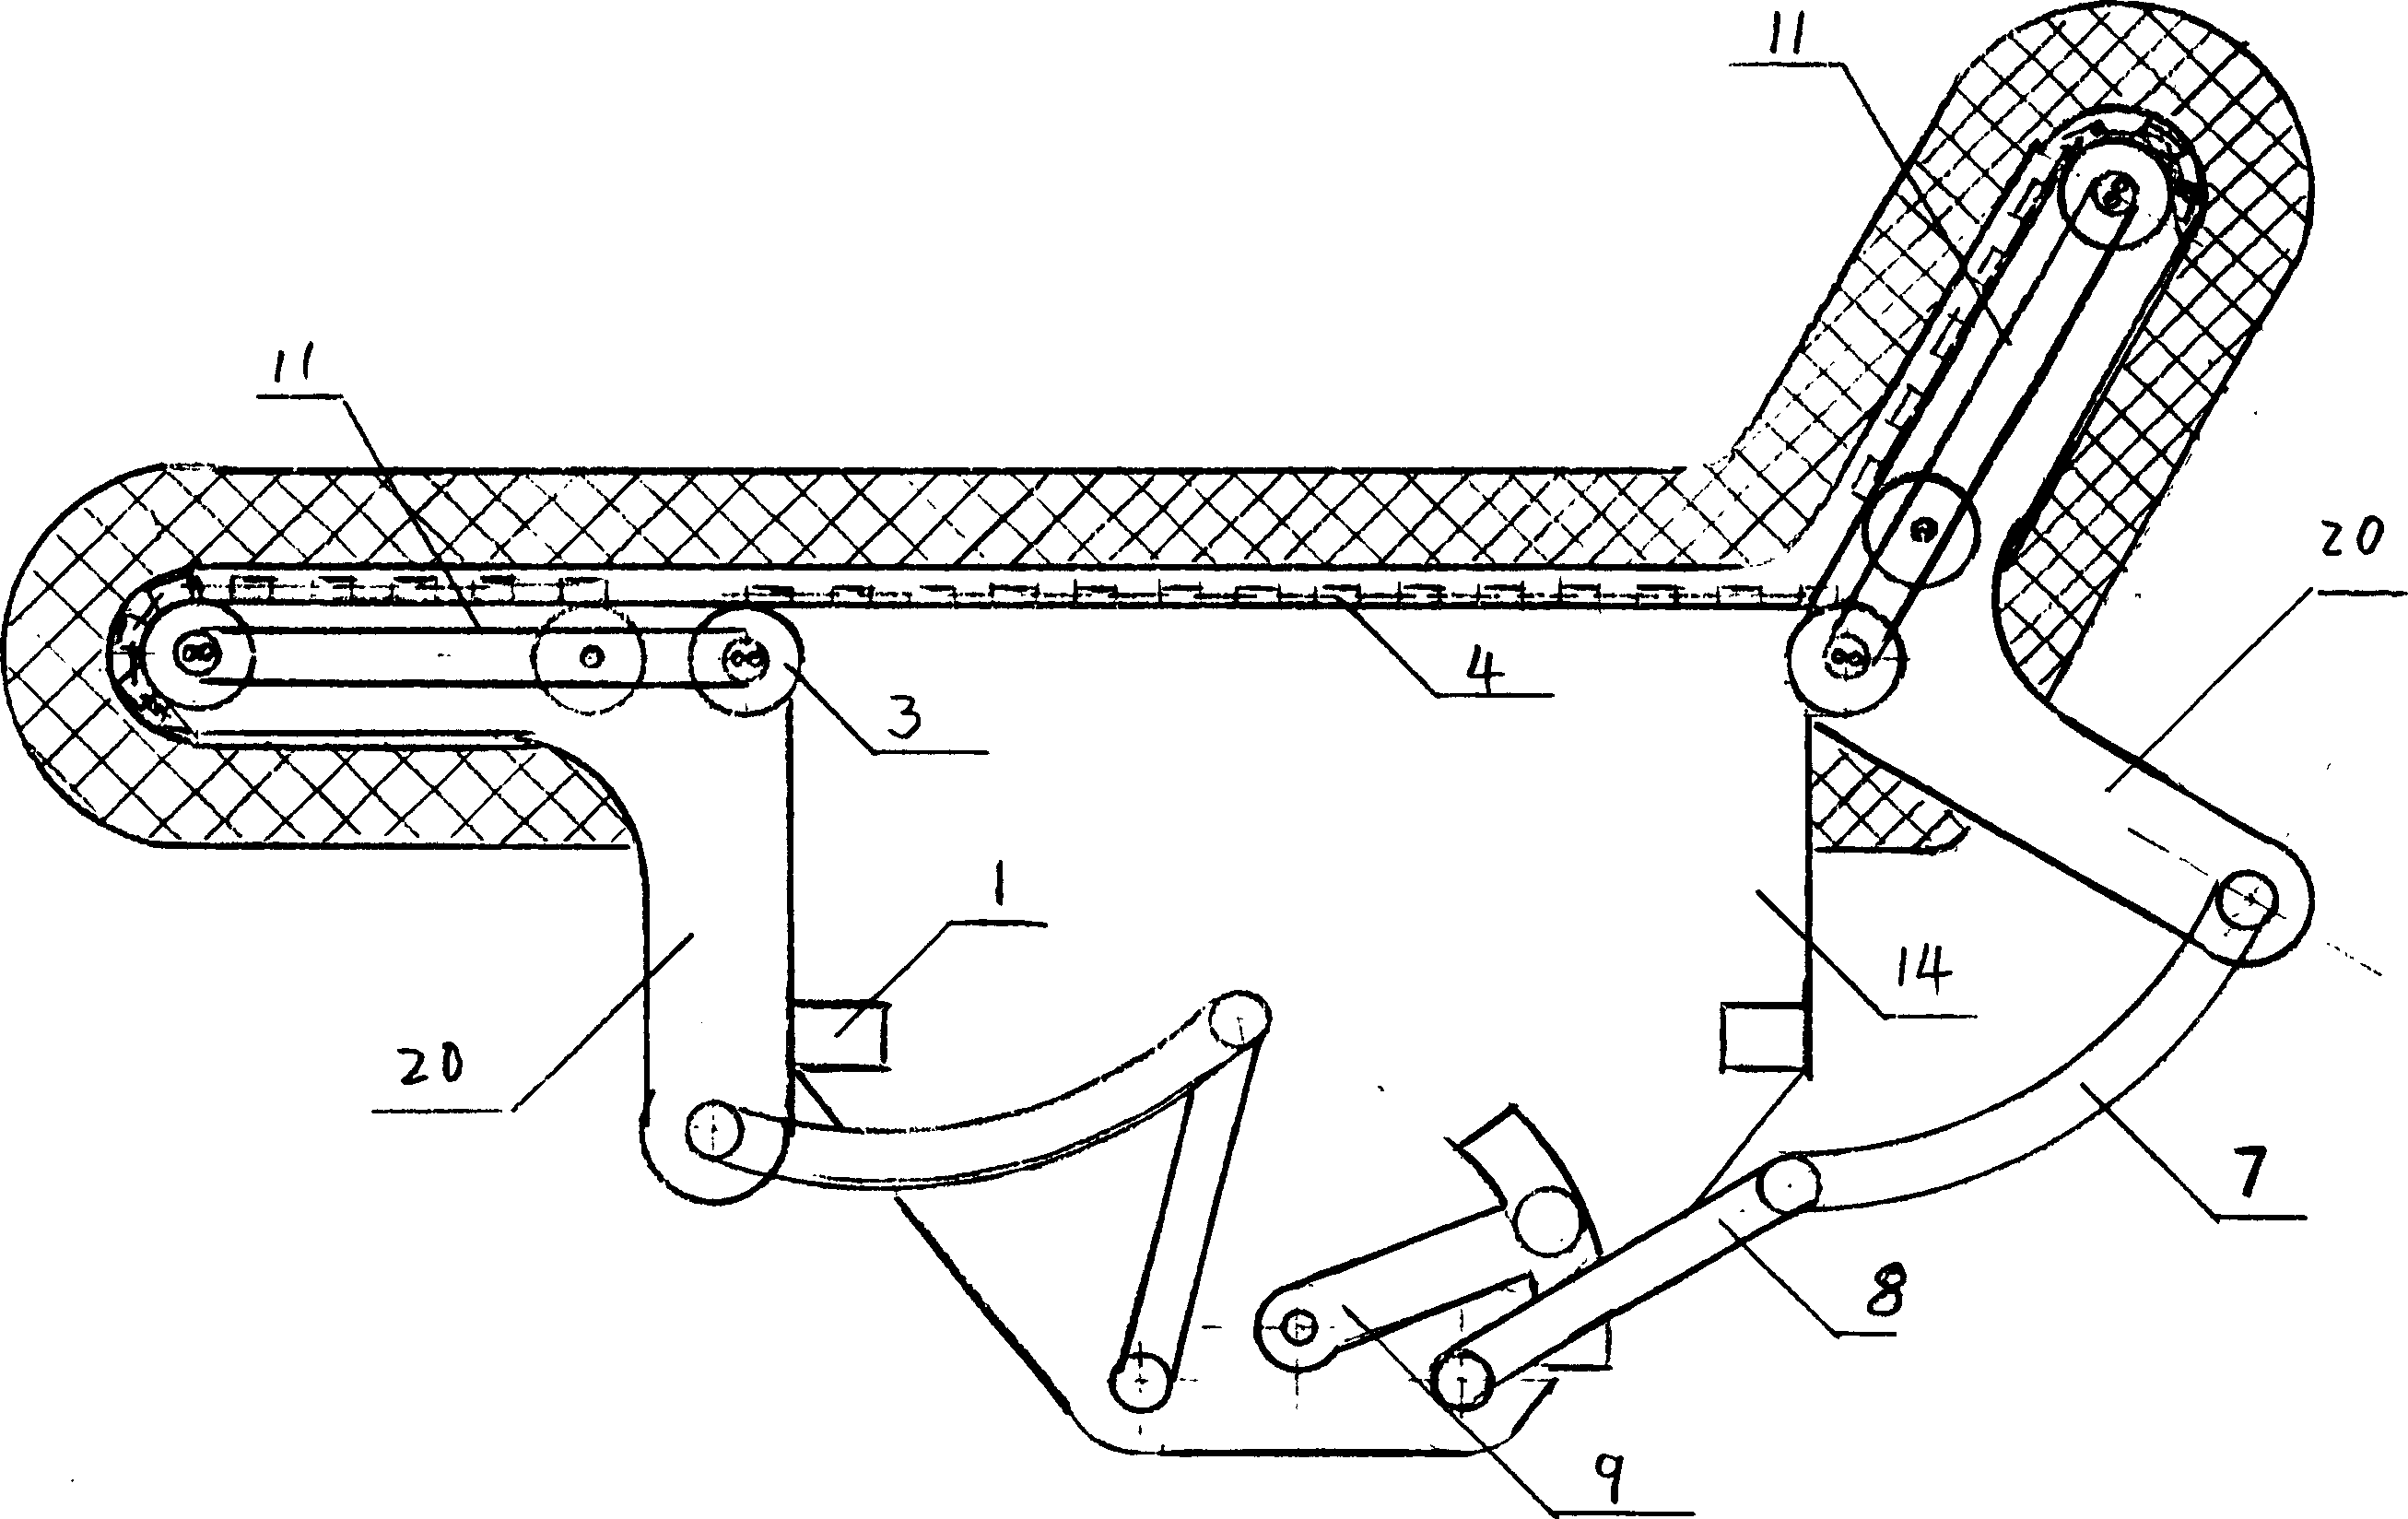 Medical turning-over bed using chain-scraper type plate